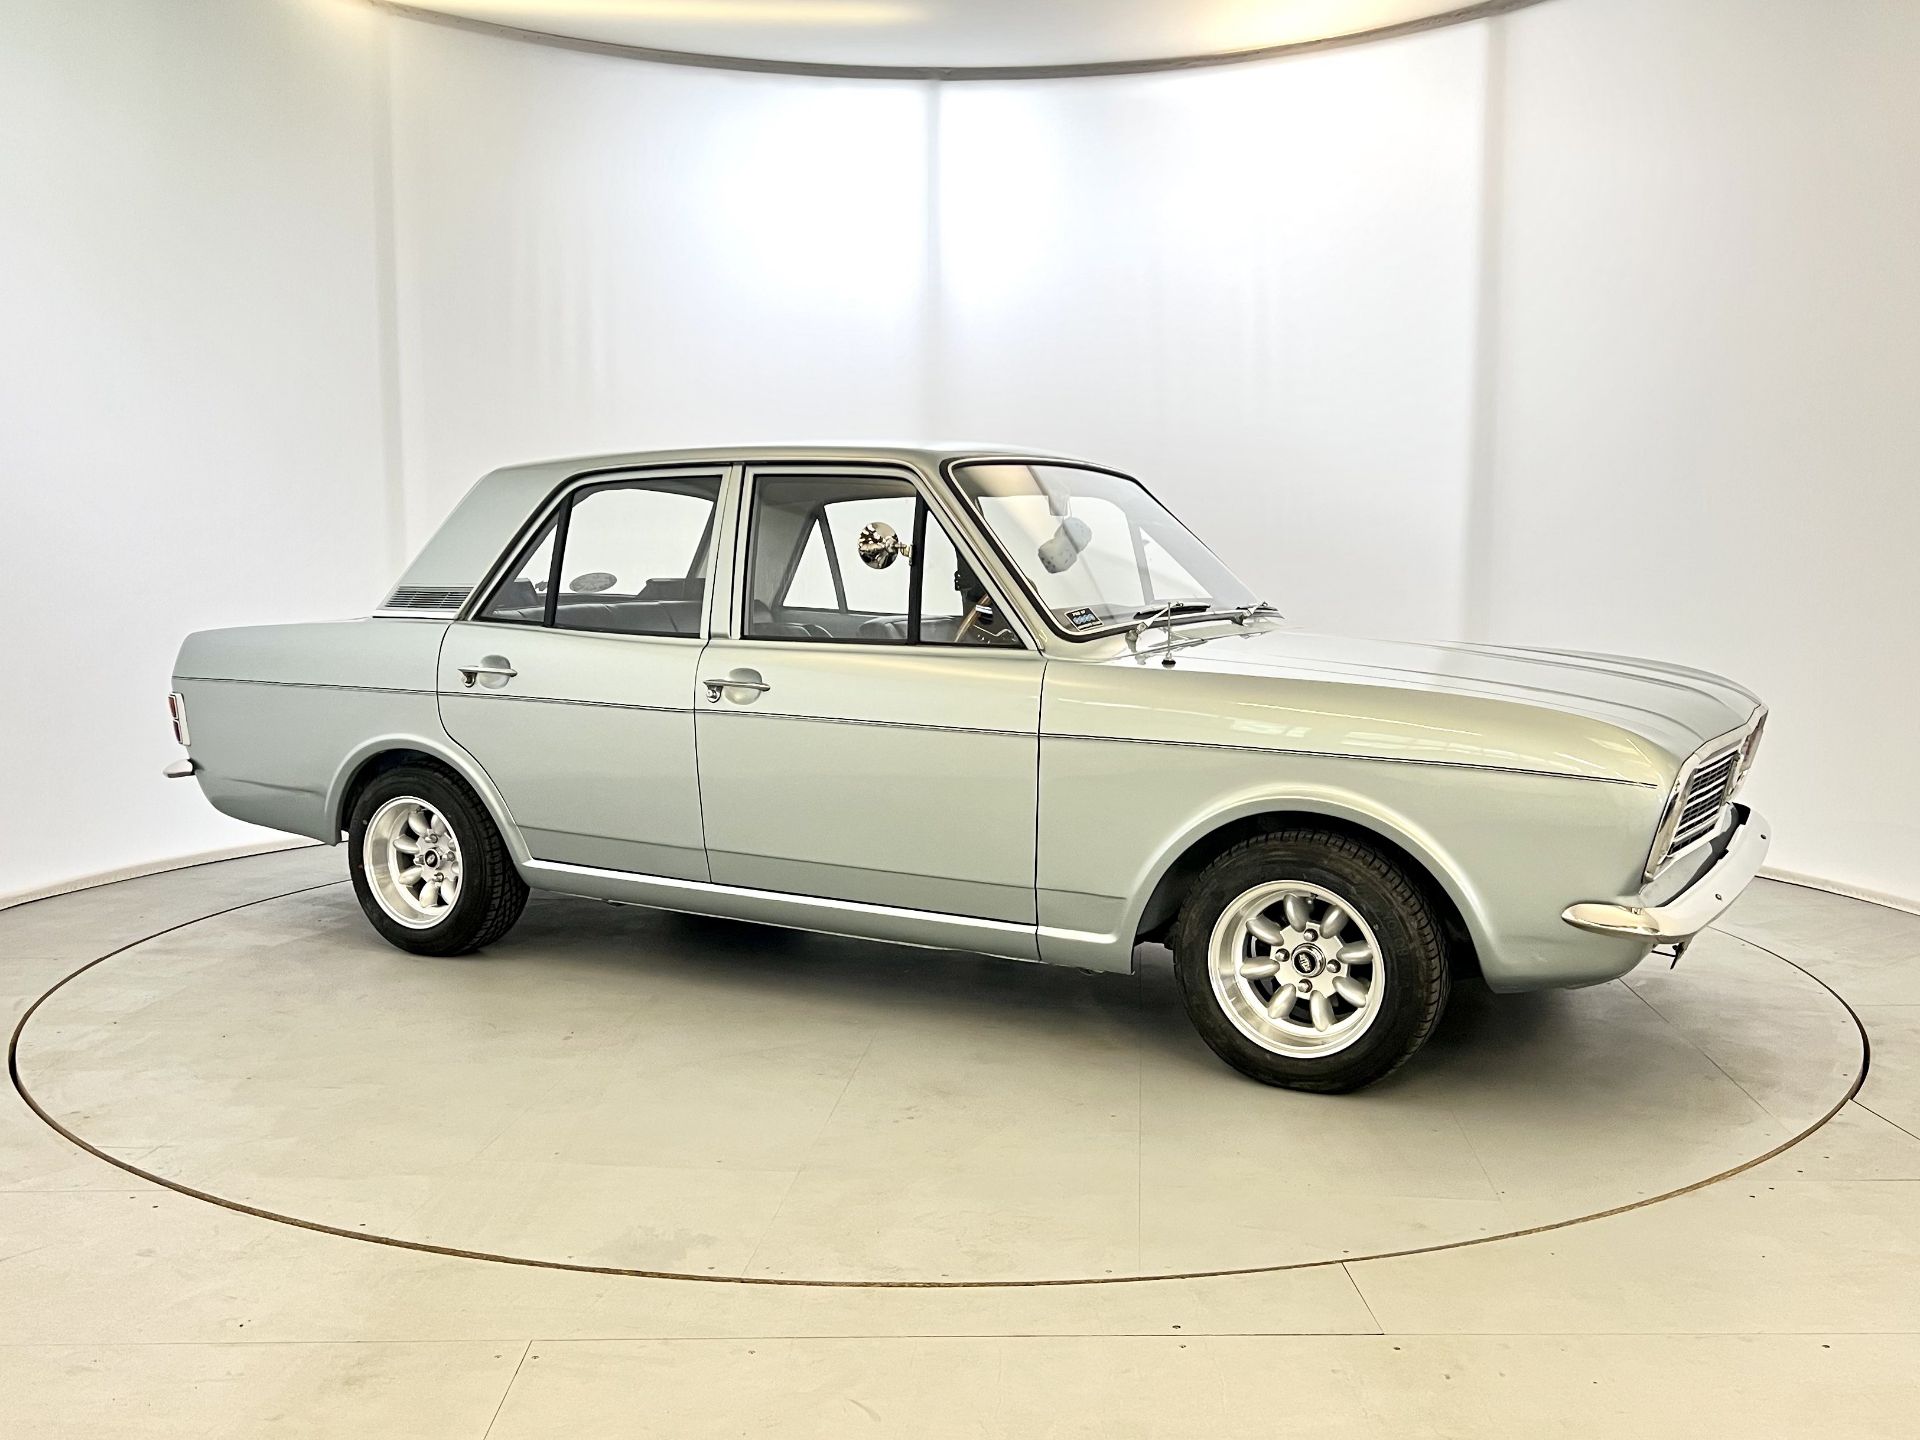 Ford Cortina 1300 DeLuxe - Image 12 of 36